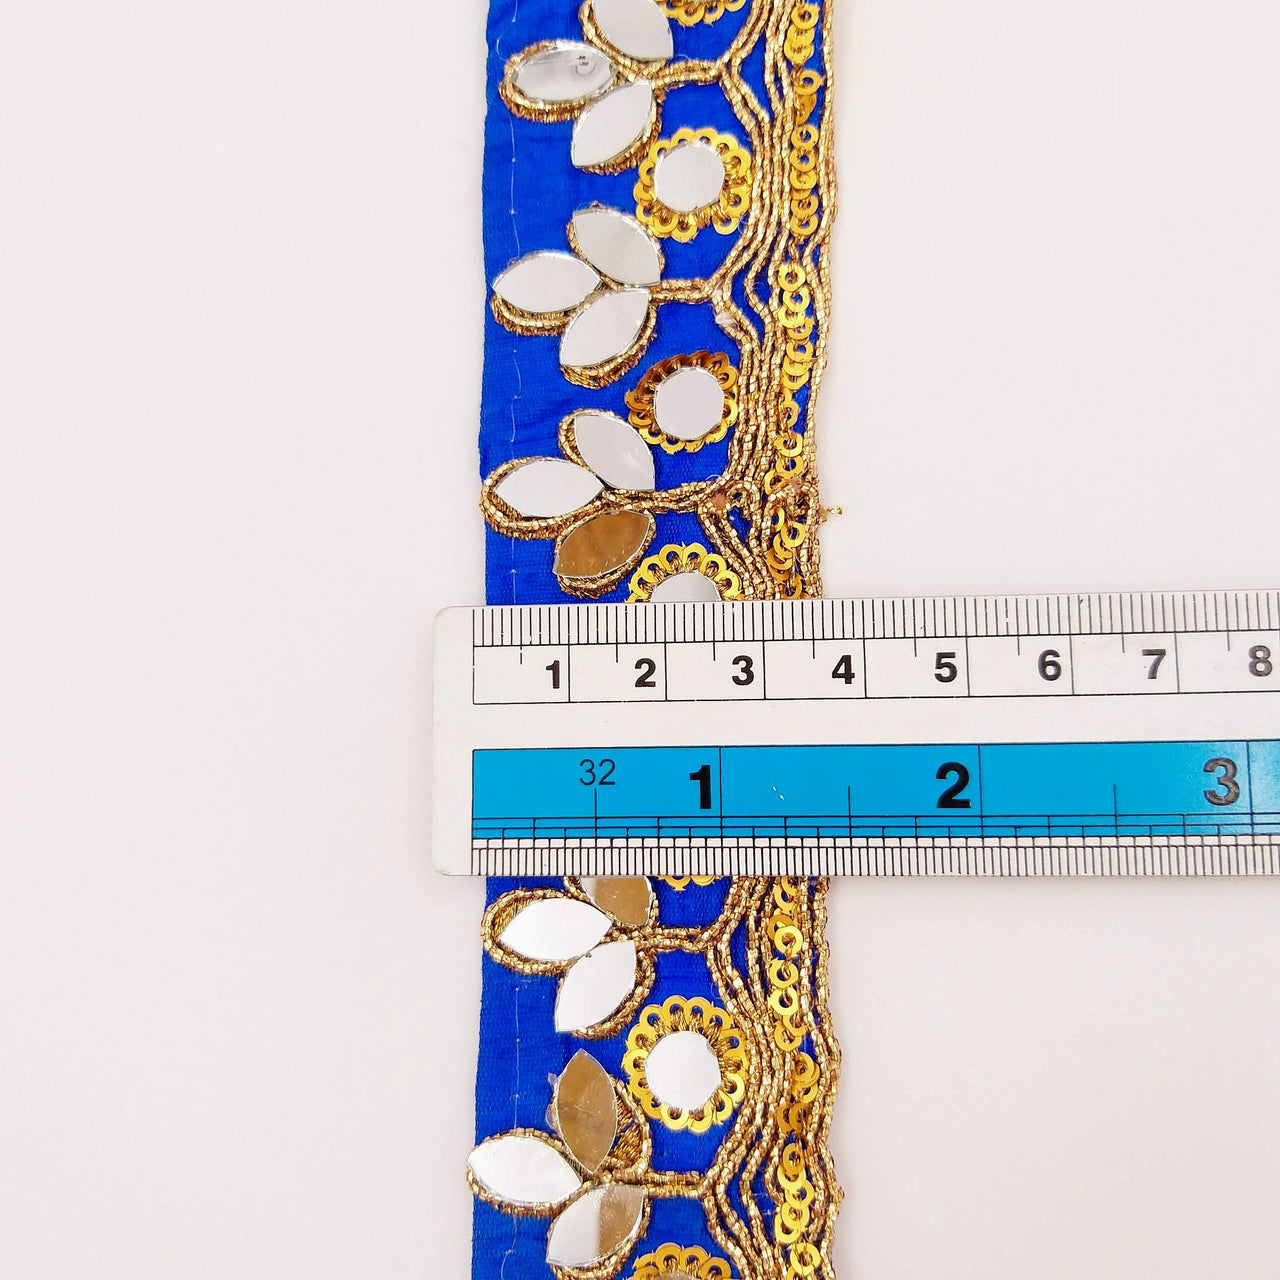 Royal Blue Silk Trim With Mirrors Embellishments and Gold Embroidery, Approx. 34mm Wide, Decorative Trim Costume Trim Fashion Trim By Yard